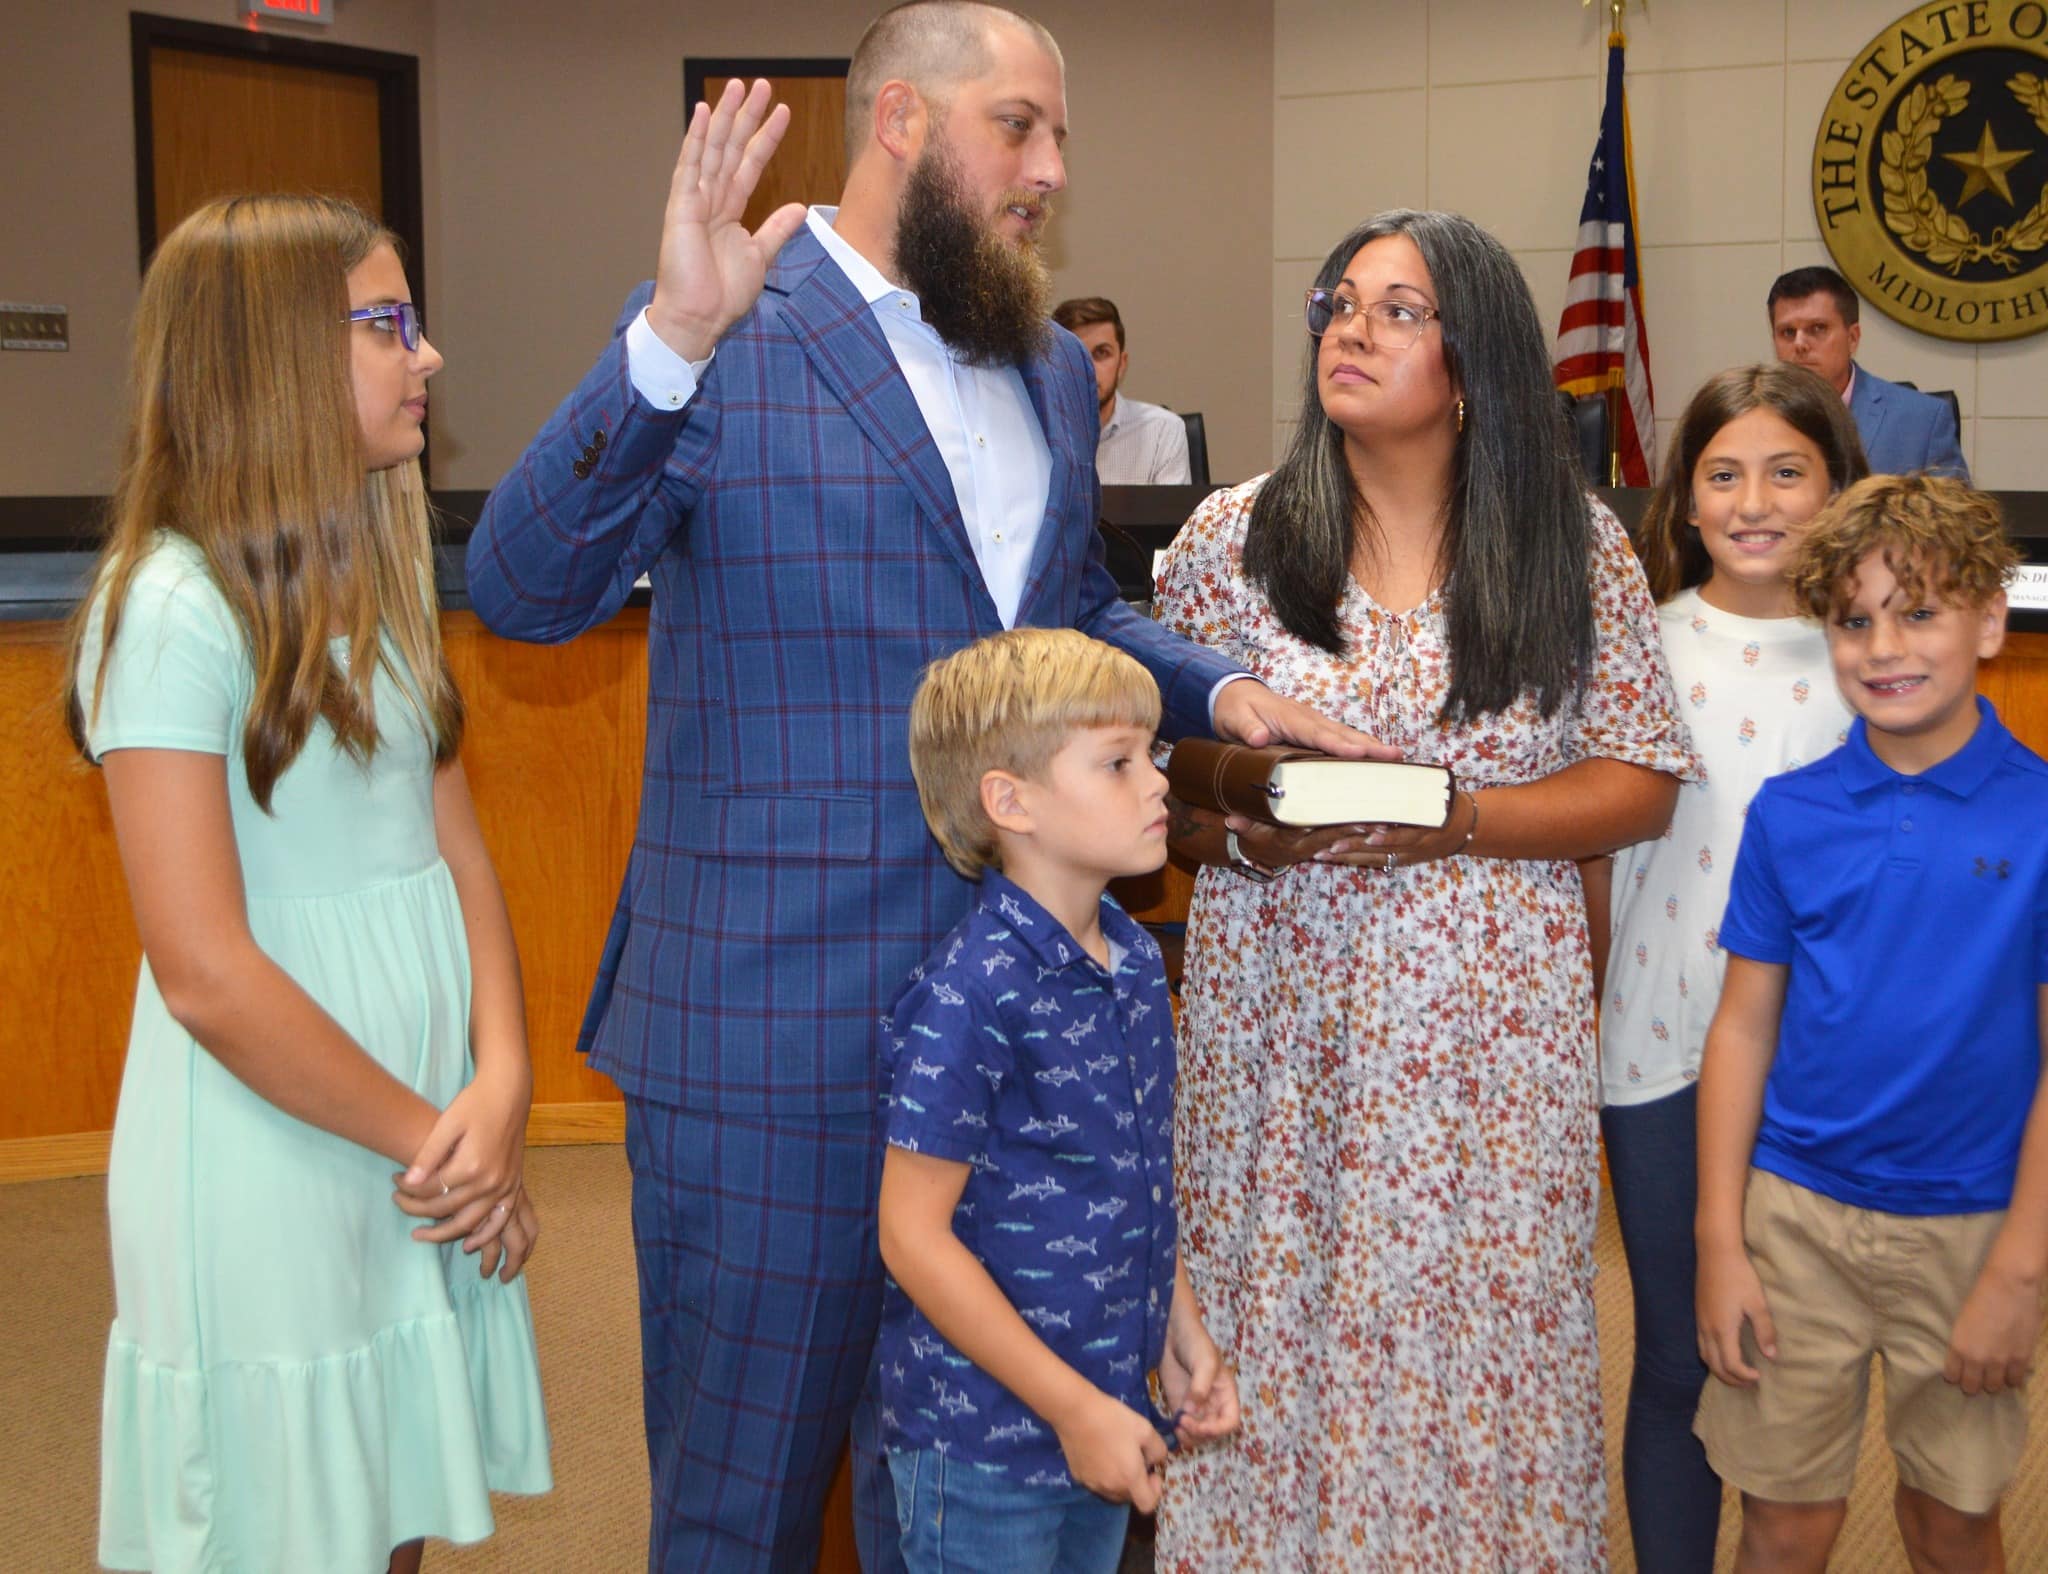 Allen Moorman with family takes City Council oath